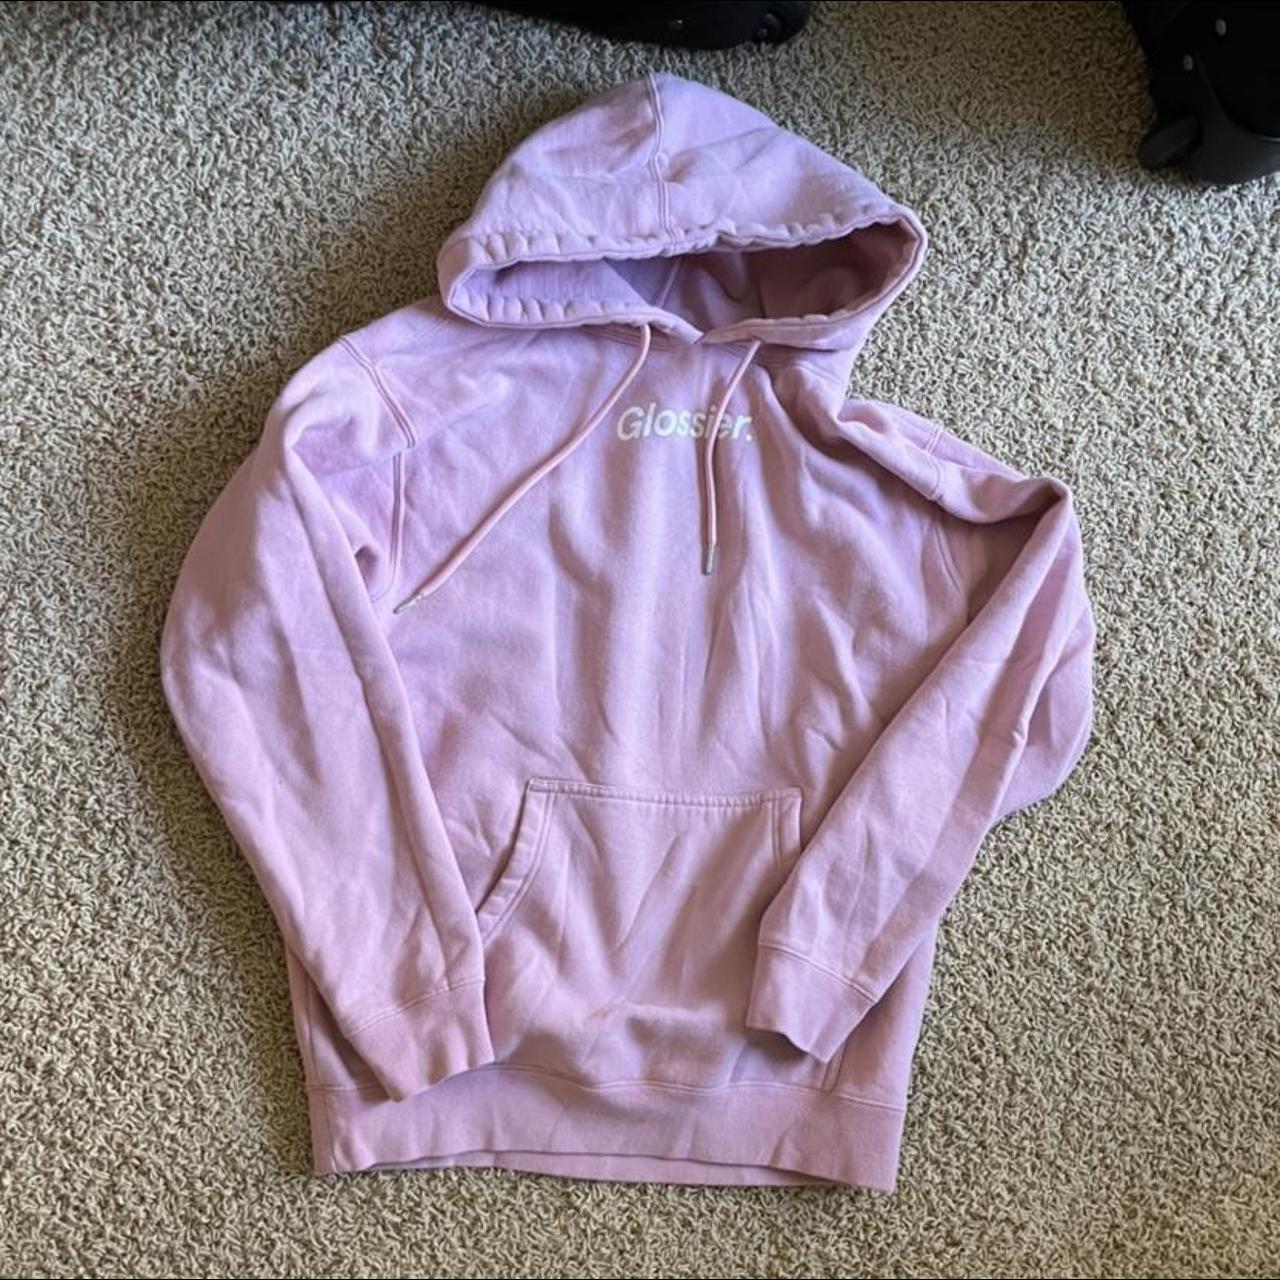 Iconic Pink Glossier Hoodie ~Size Small but fits... - Depop